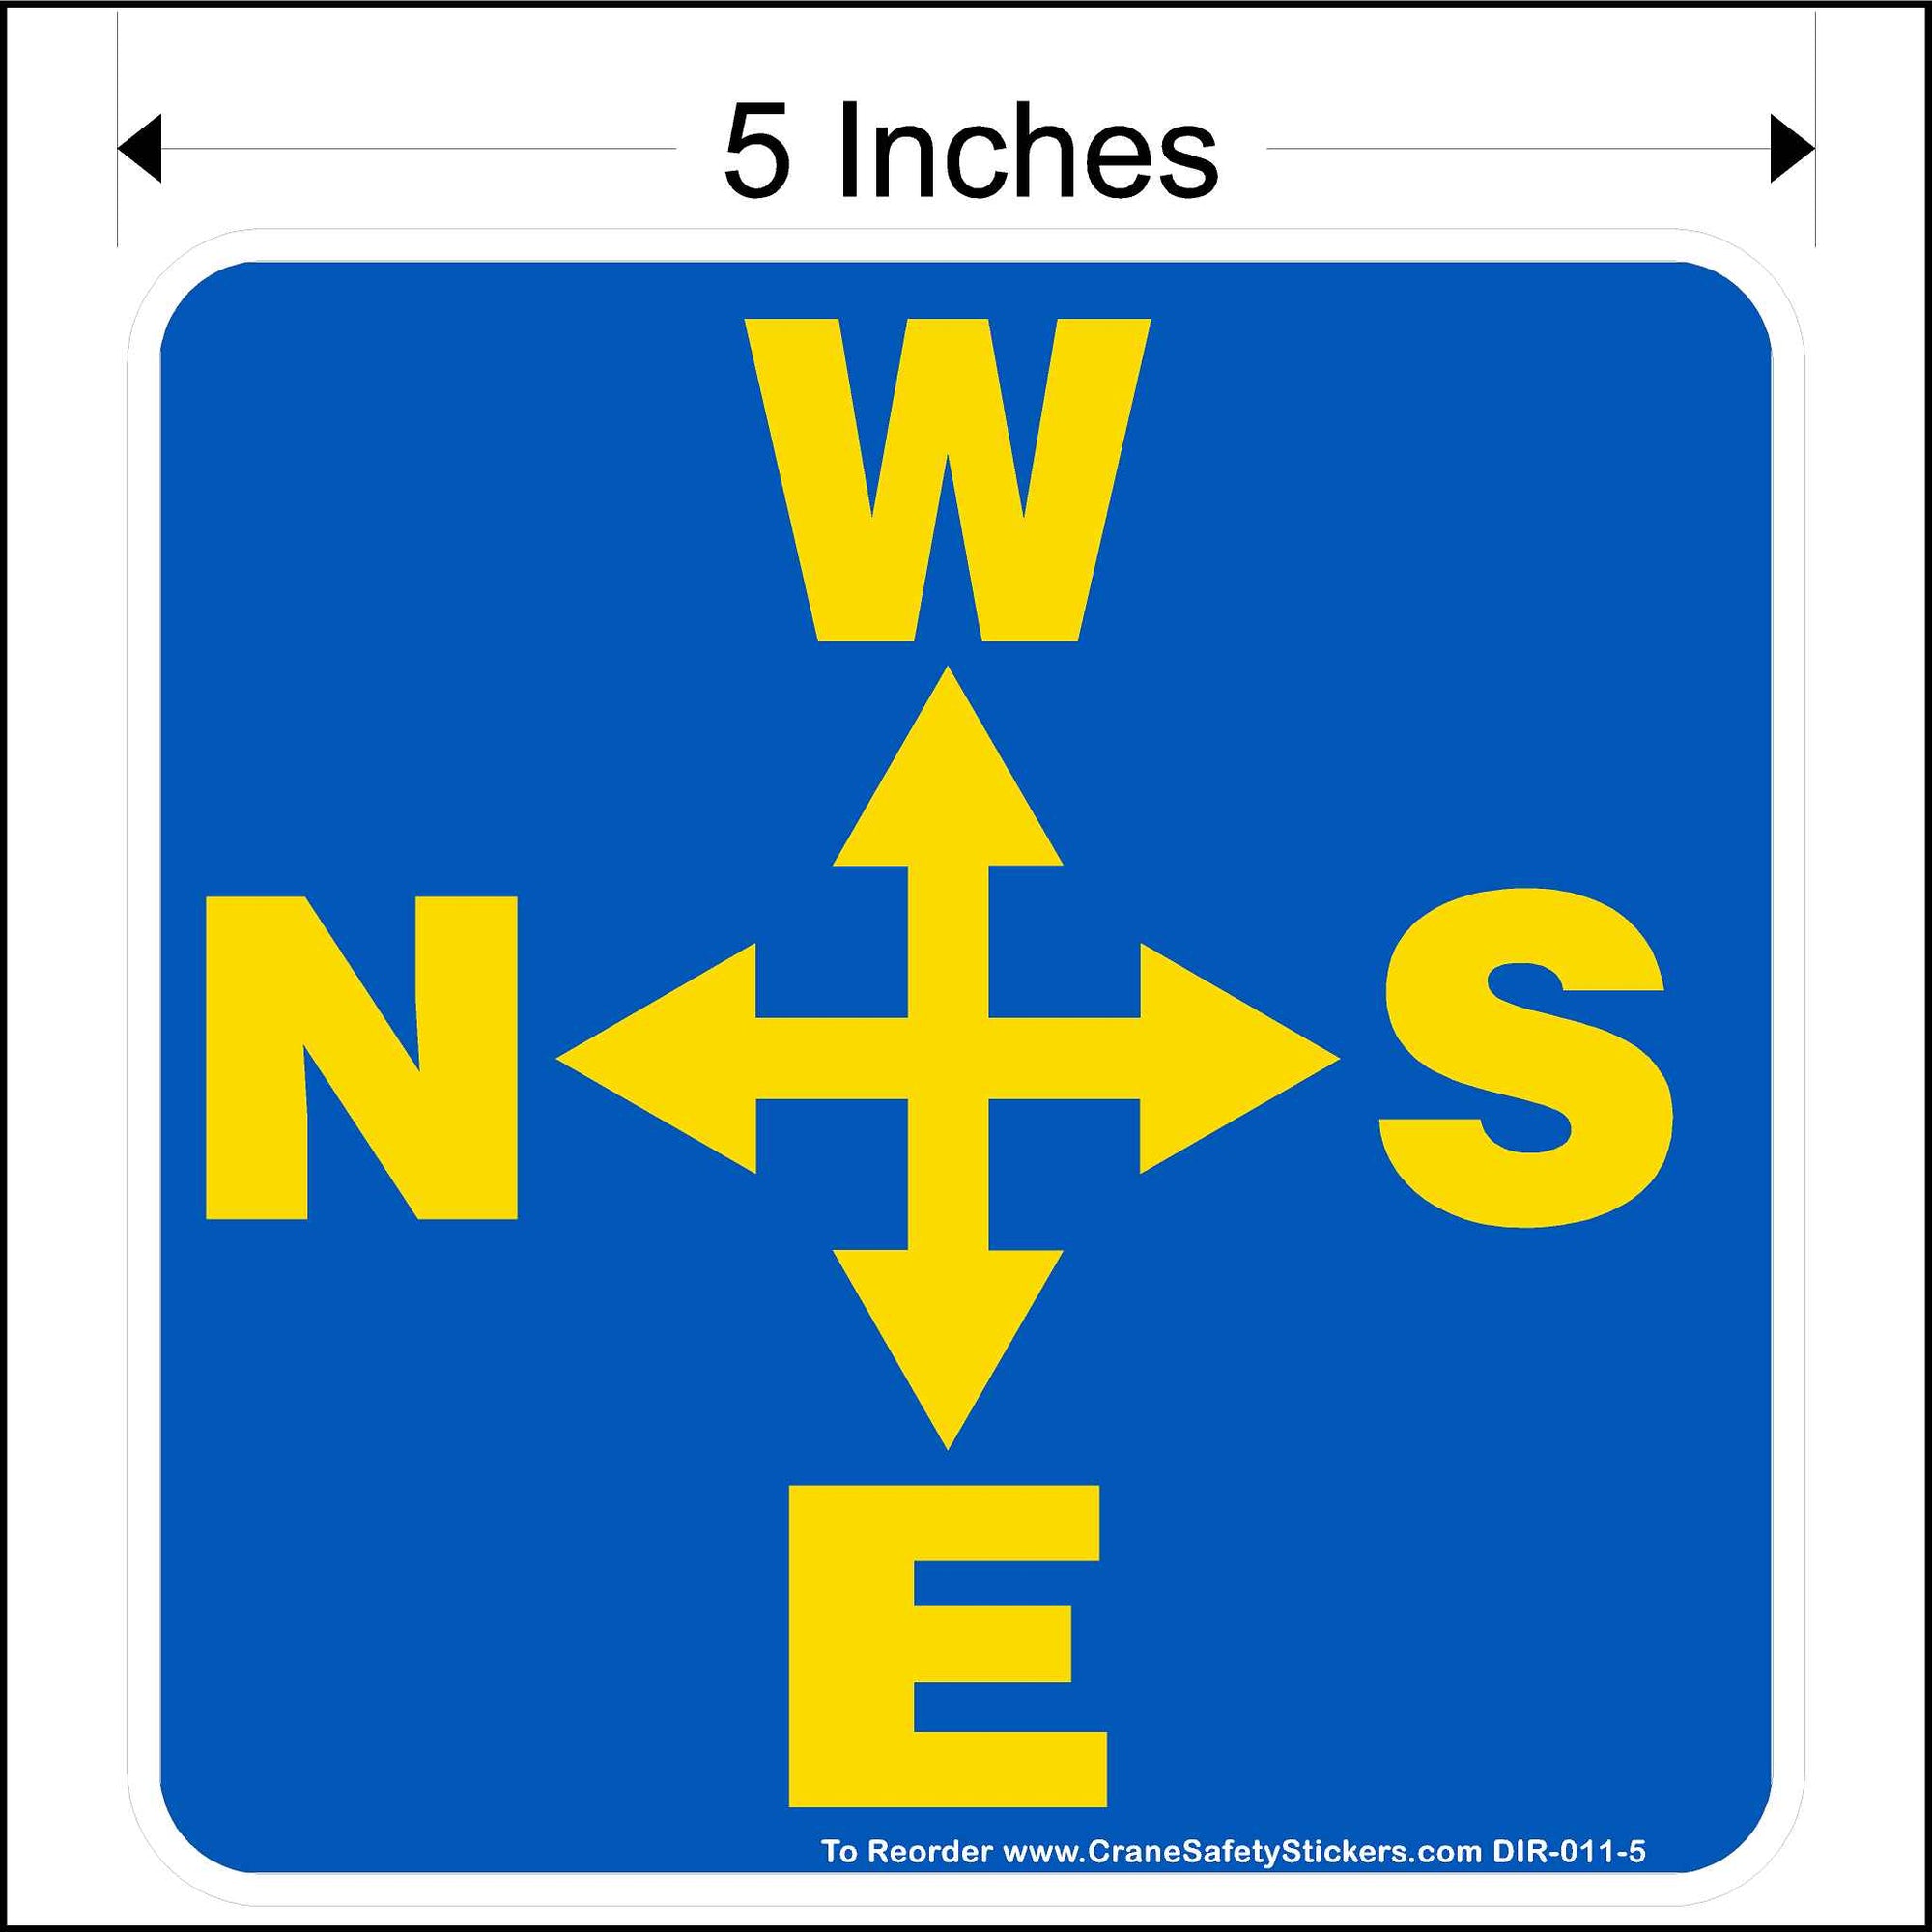 5 Inch overhead crane directional decal. This decal is placed on the side of the crane and has west, south, east, and north arrows printed in yellow on a blue background.